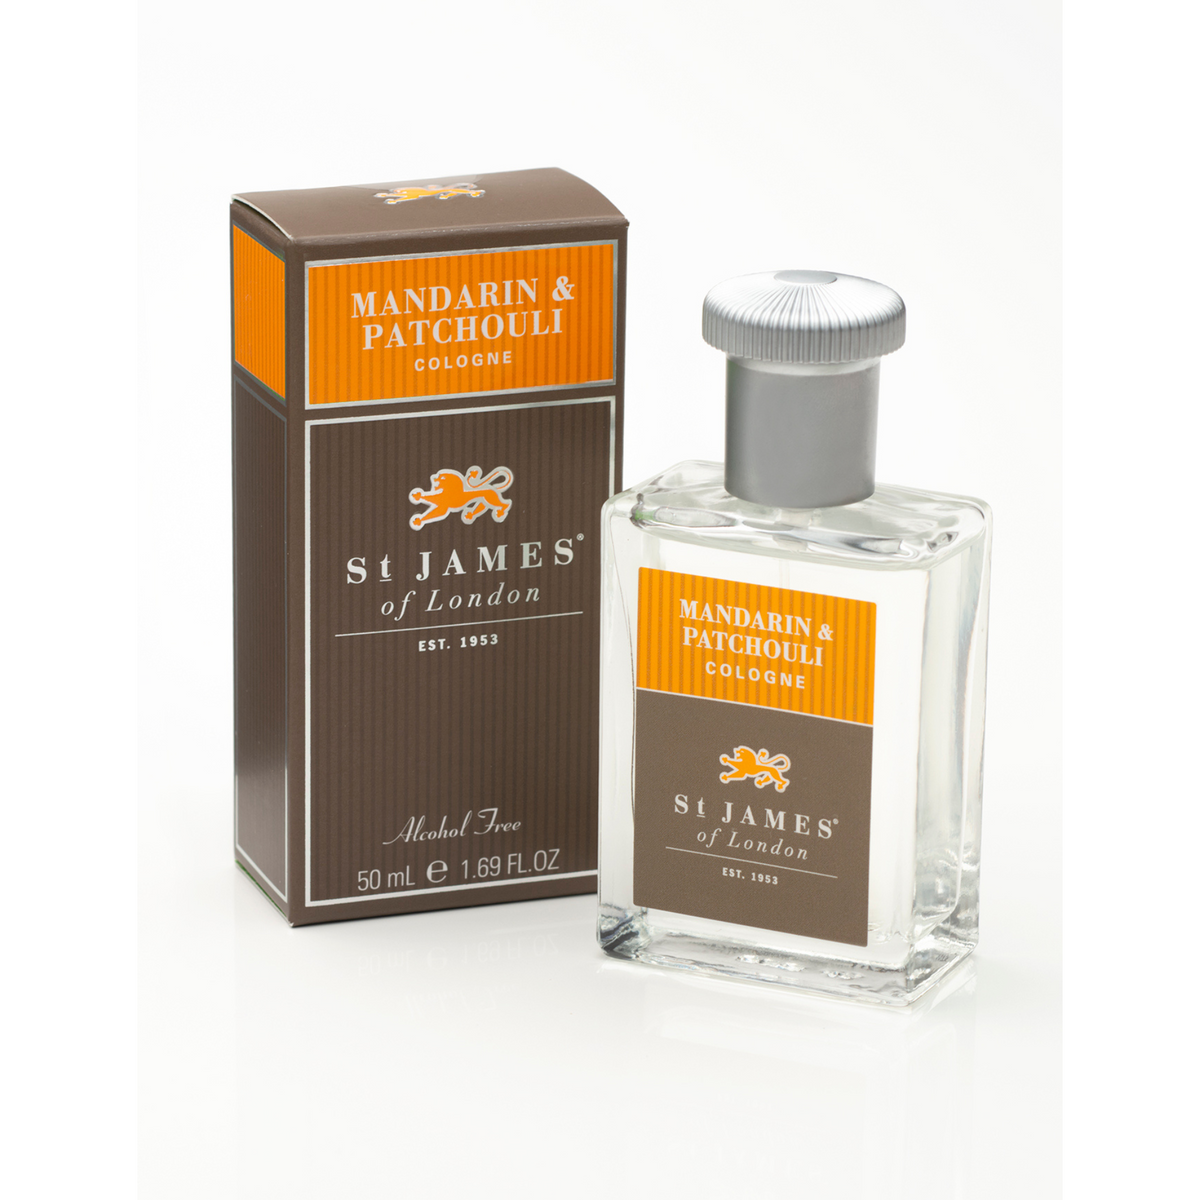 Primary image of Mandarin and Patchouli Cologne